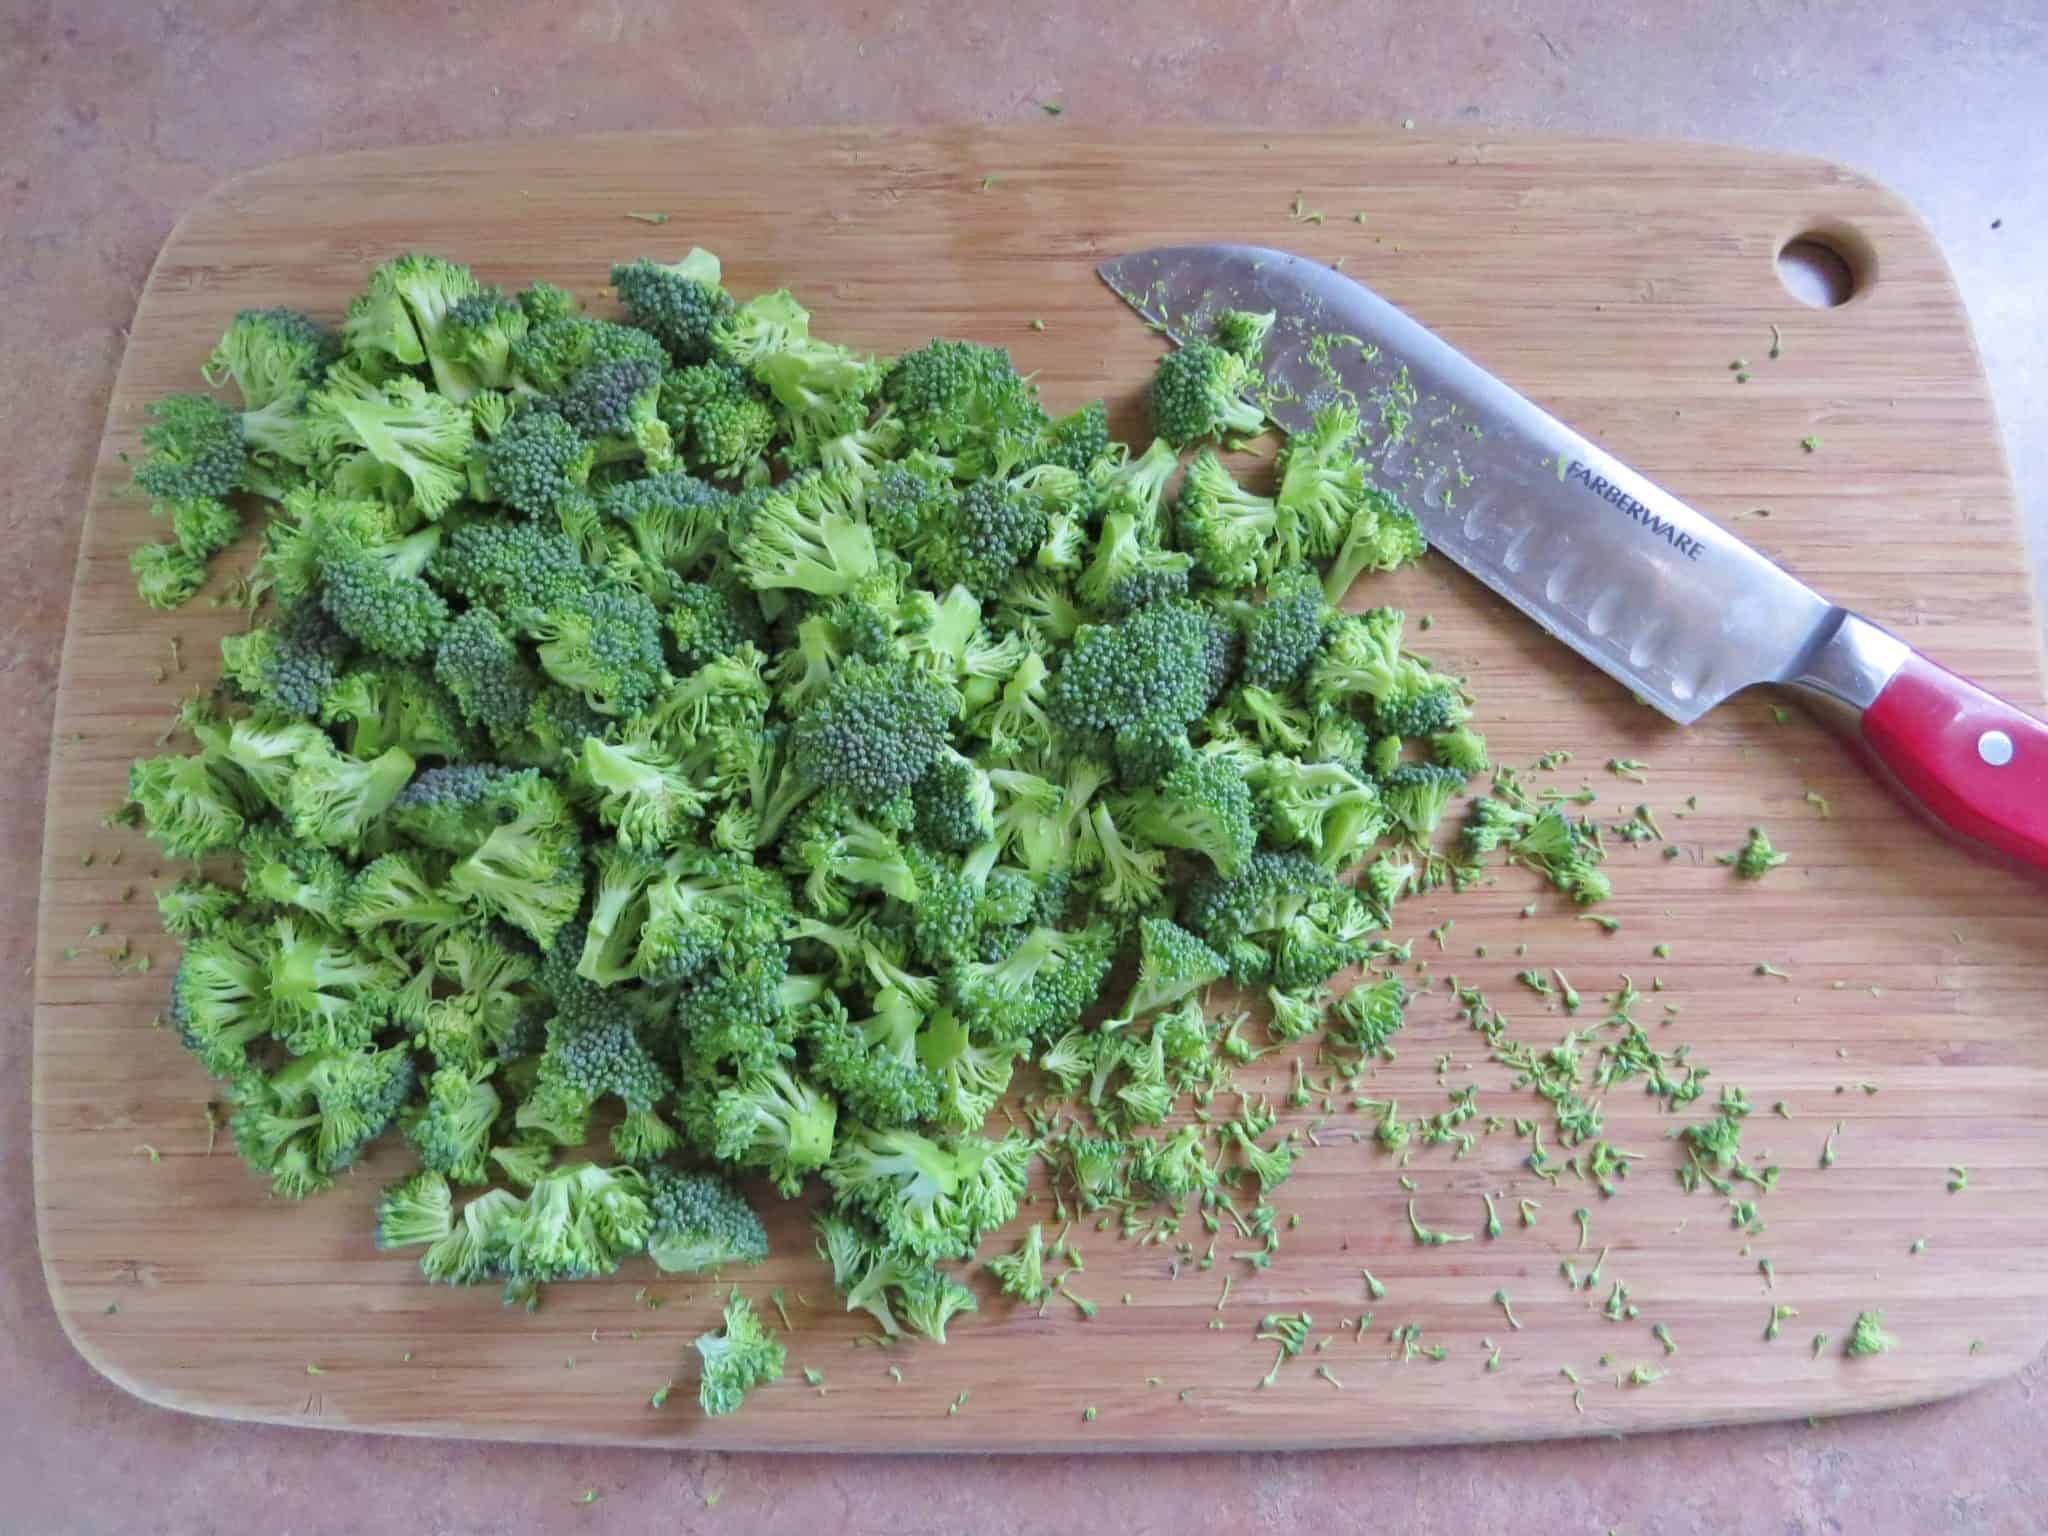 chopped fresh broccoli florets on a wooden cutting board with a chef's knife.